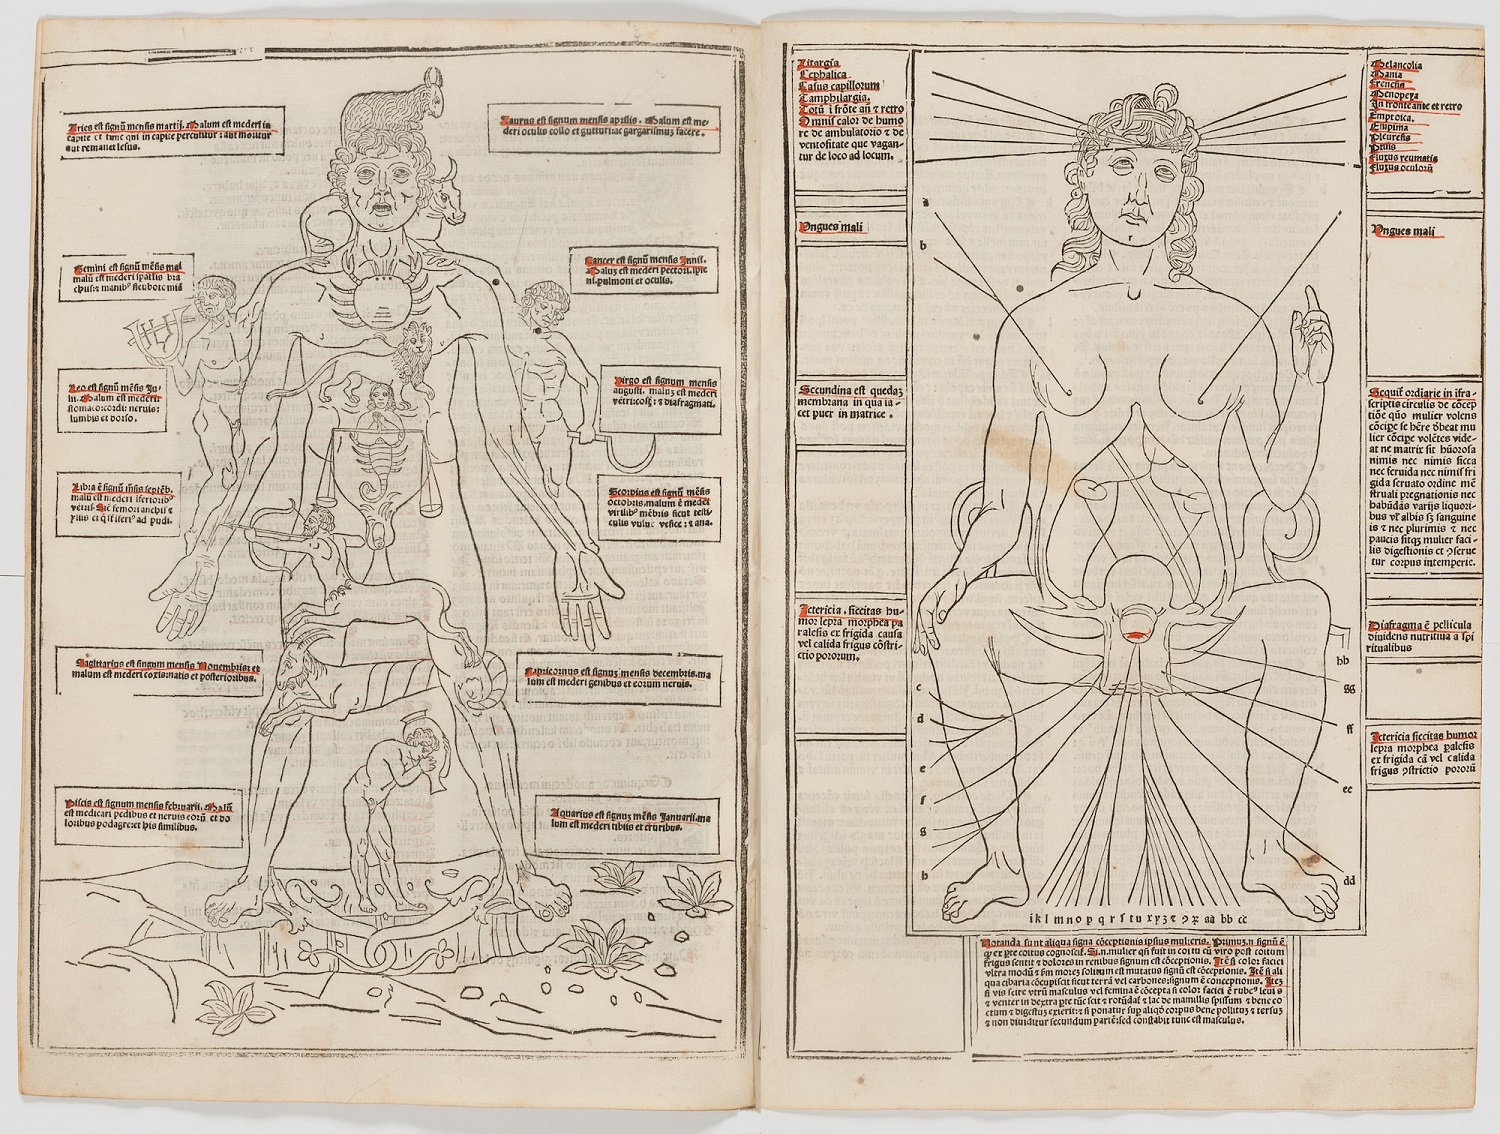 Diagram of a male body and signs of the zodiac on the left, diagram of the female body on the right.